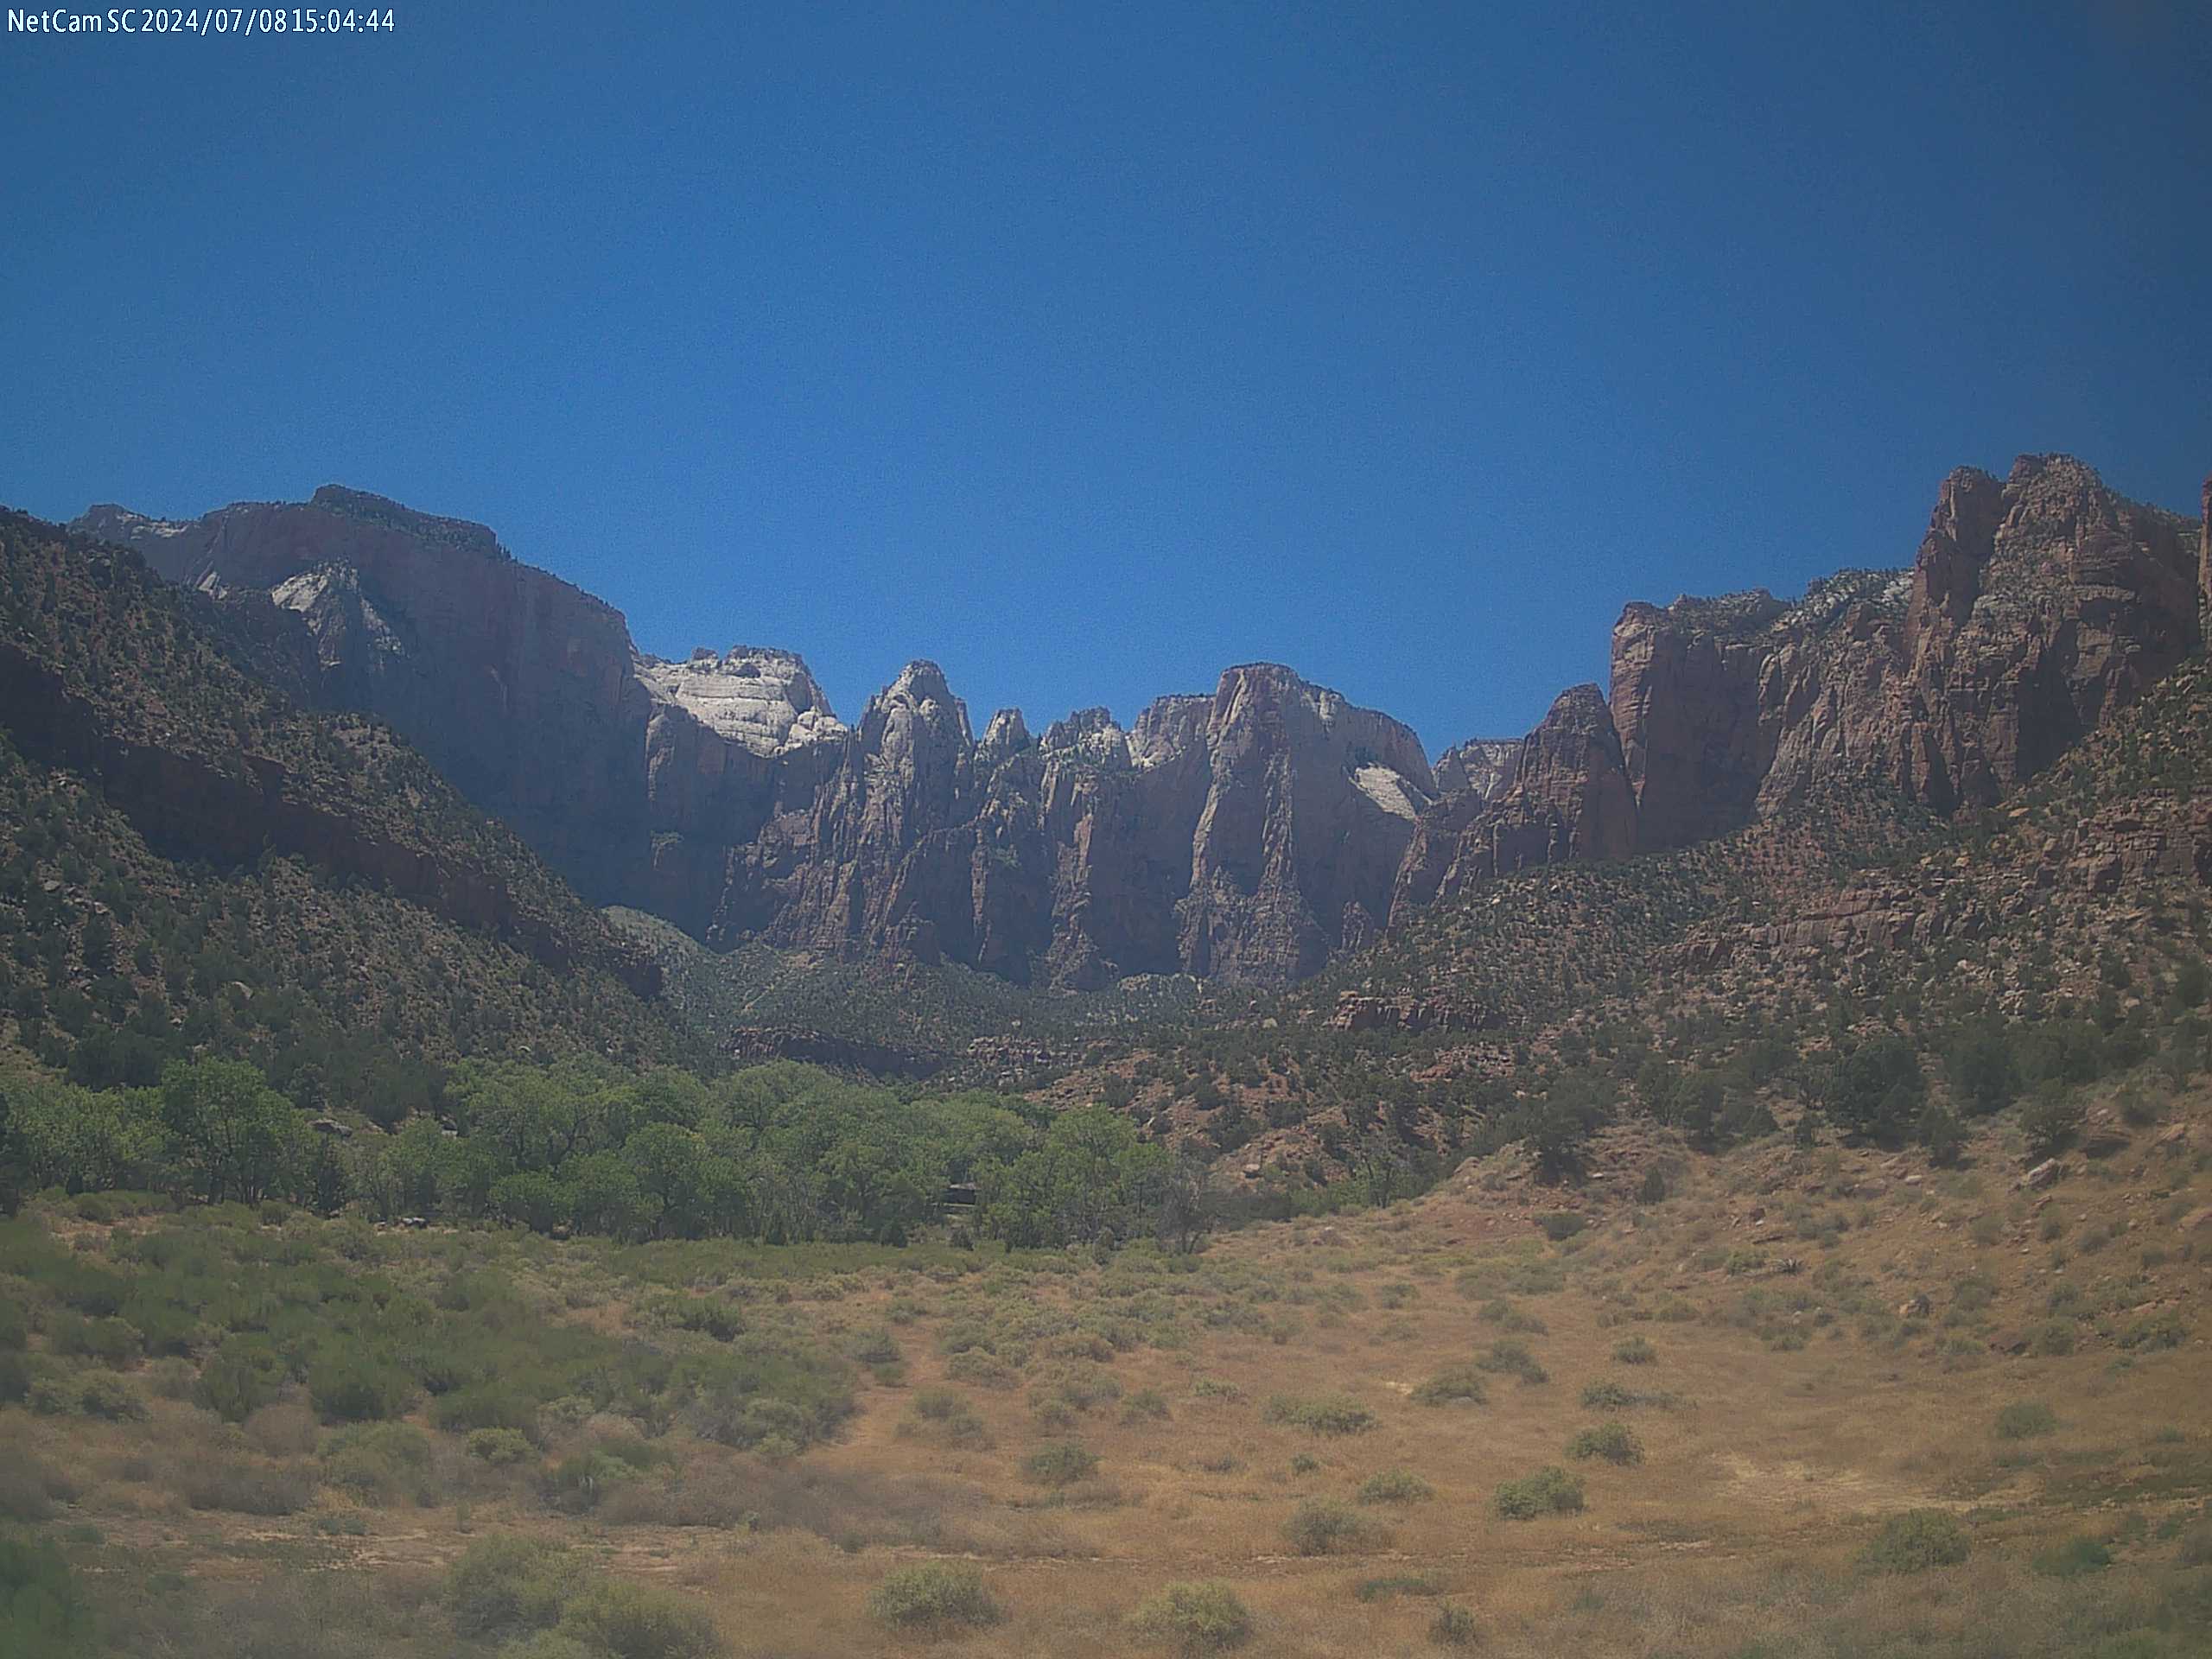 Live Webcam Zion National Park, Utah: The Temples and Towers of the Virgin1024 x 768